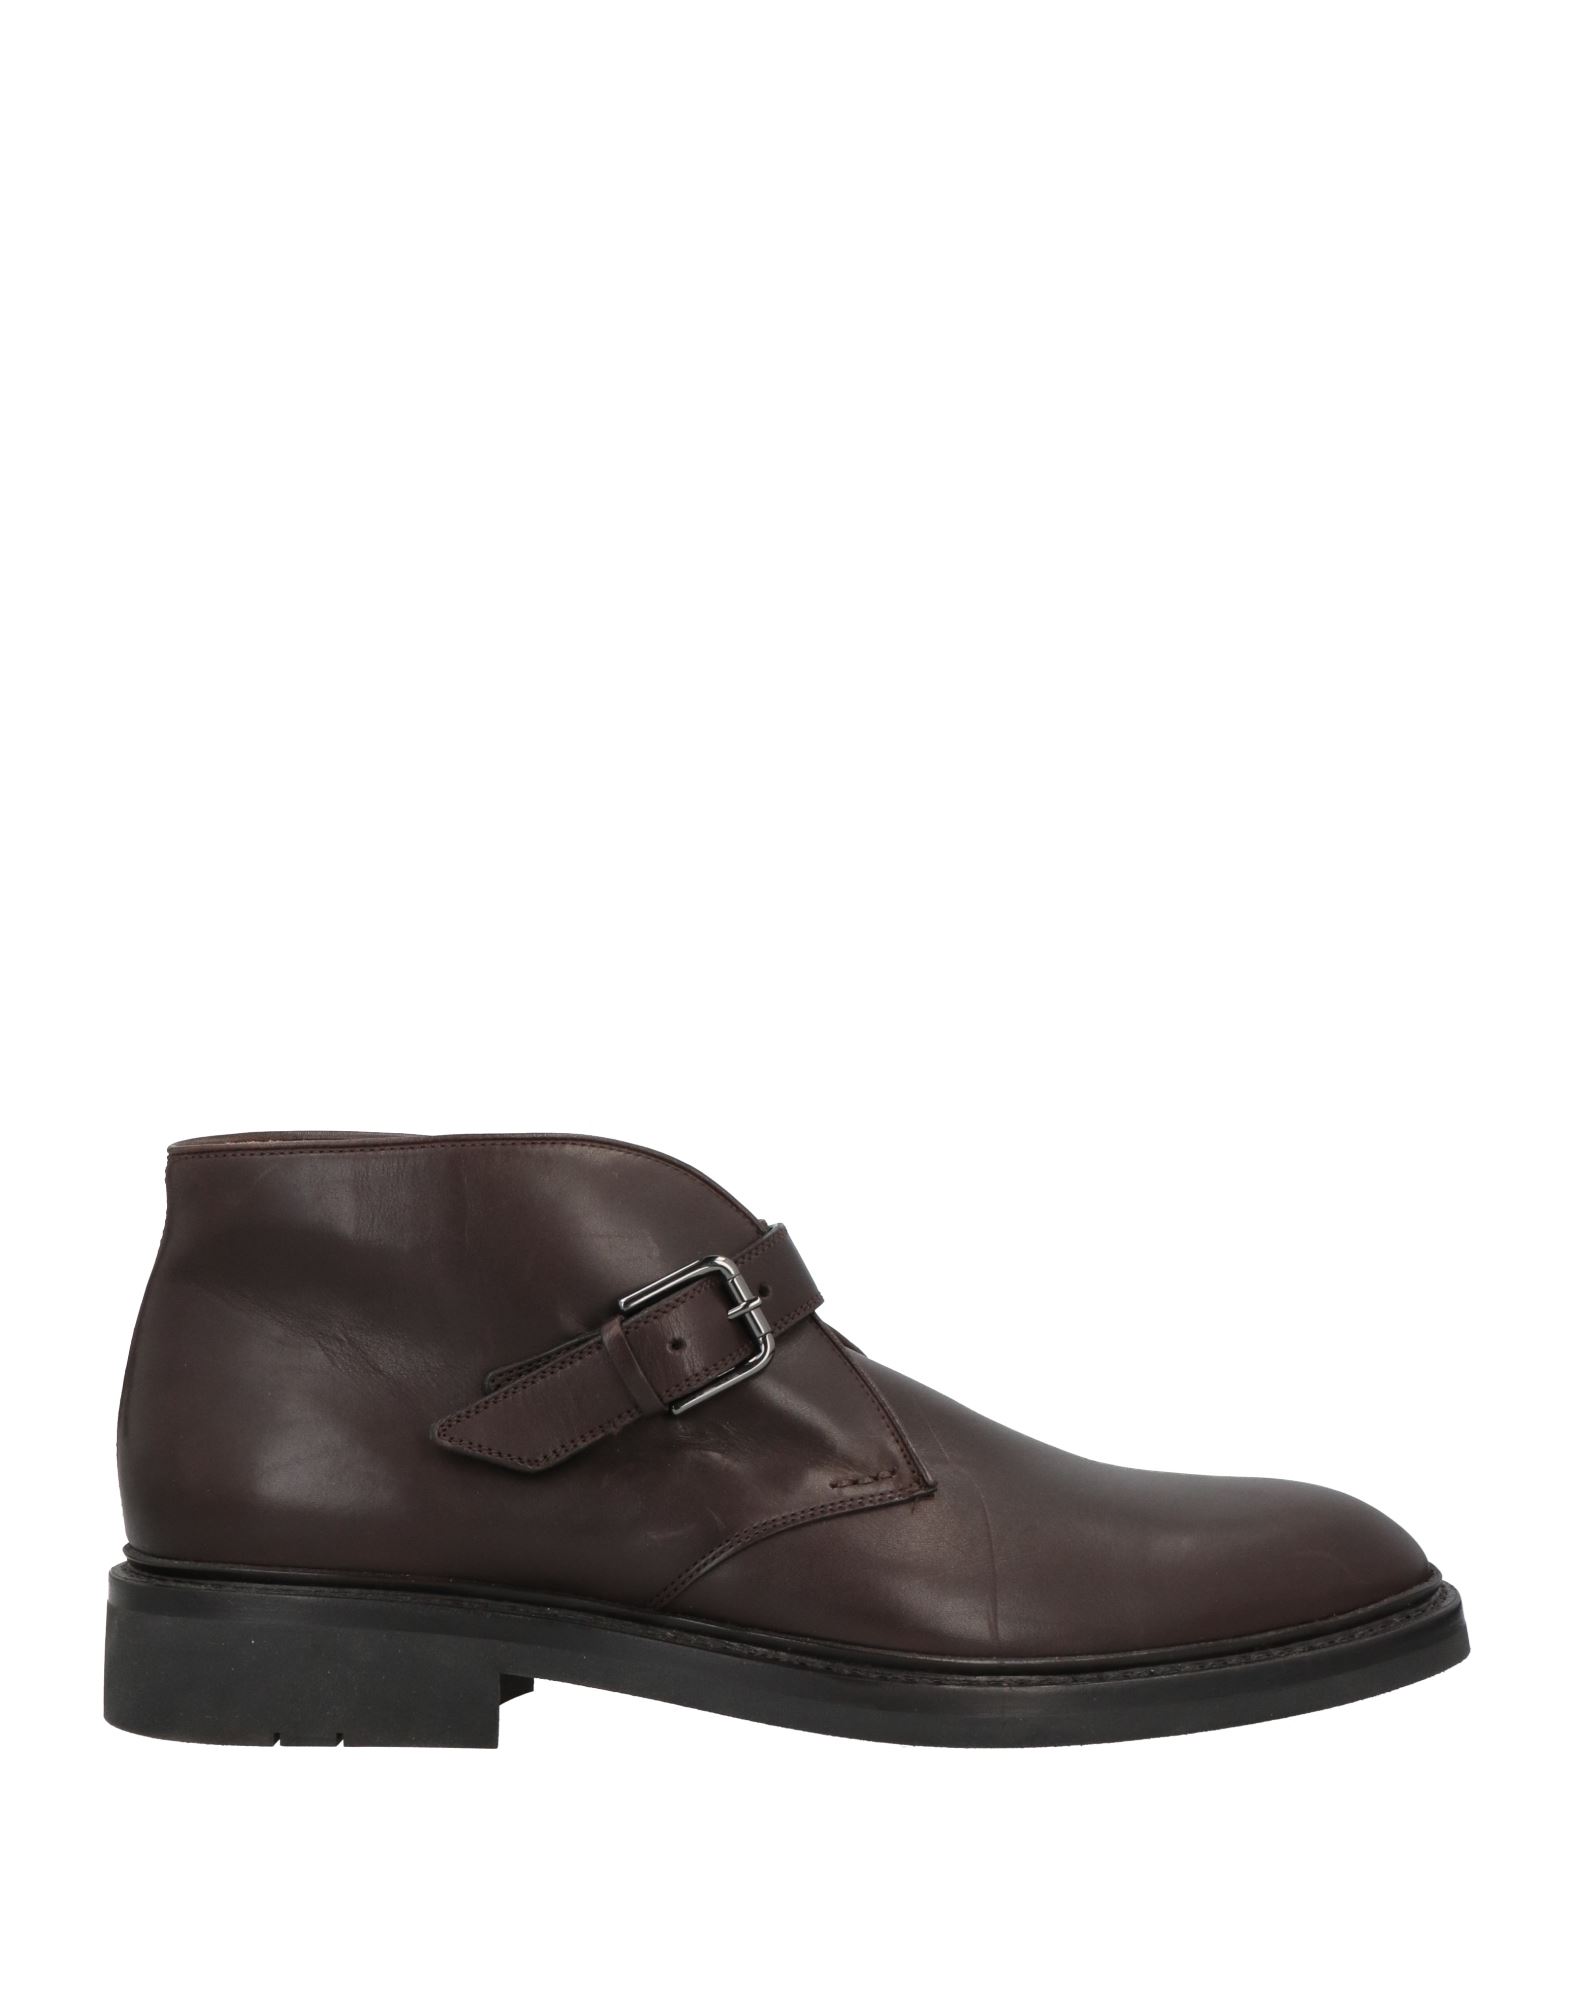 Heschung Ankle Boots In Dark Brown